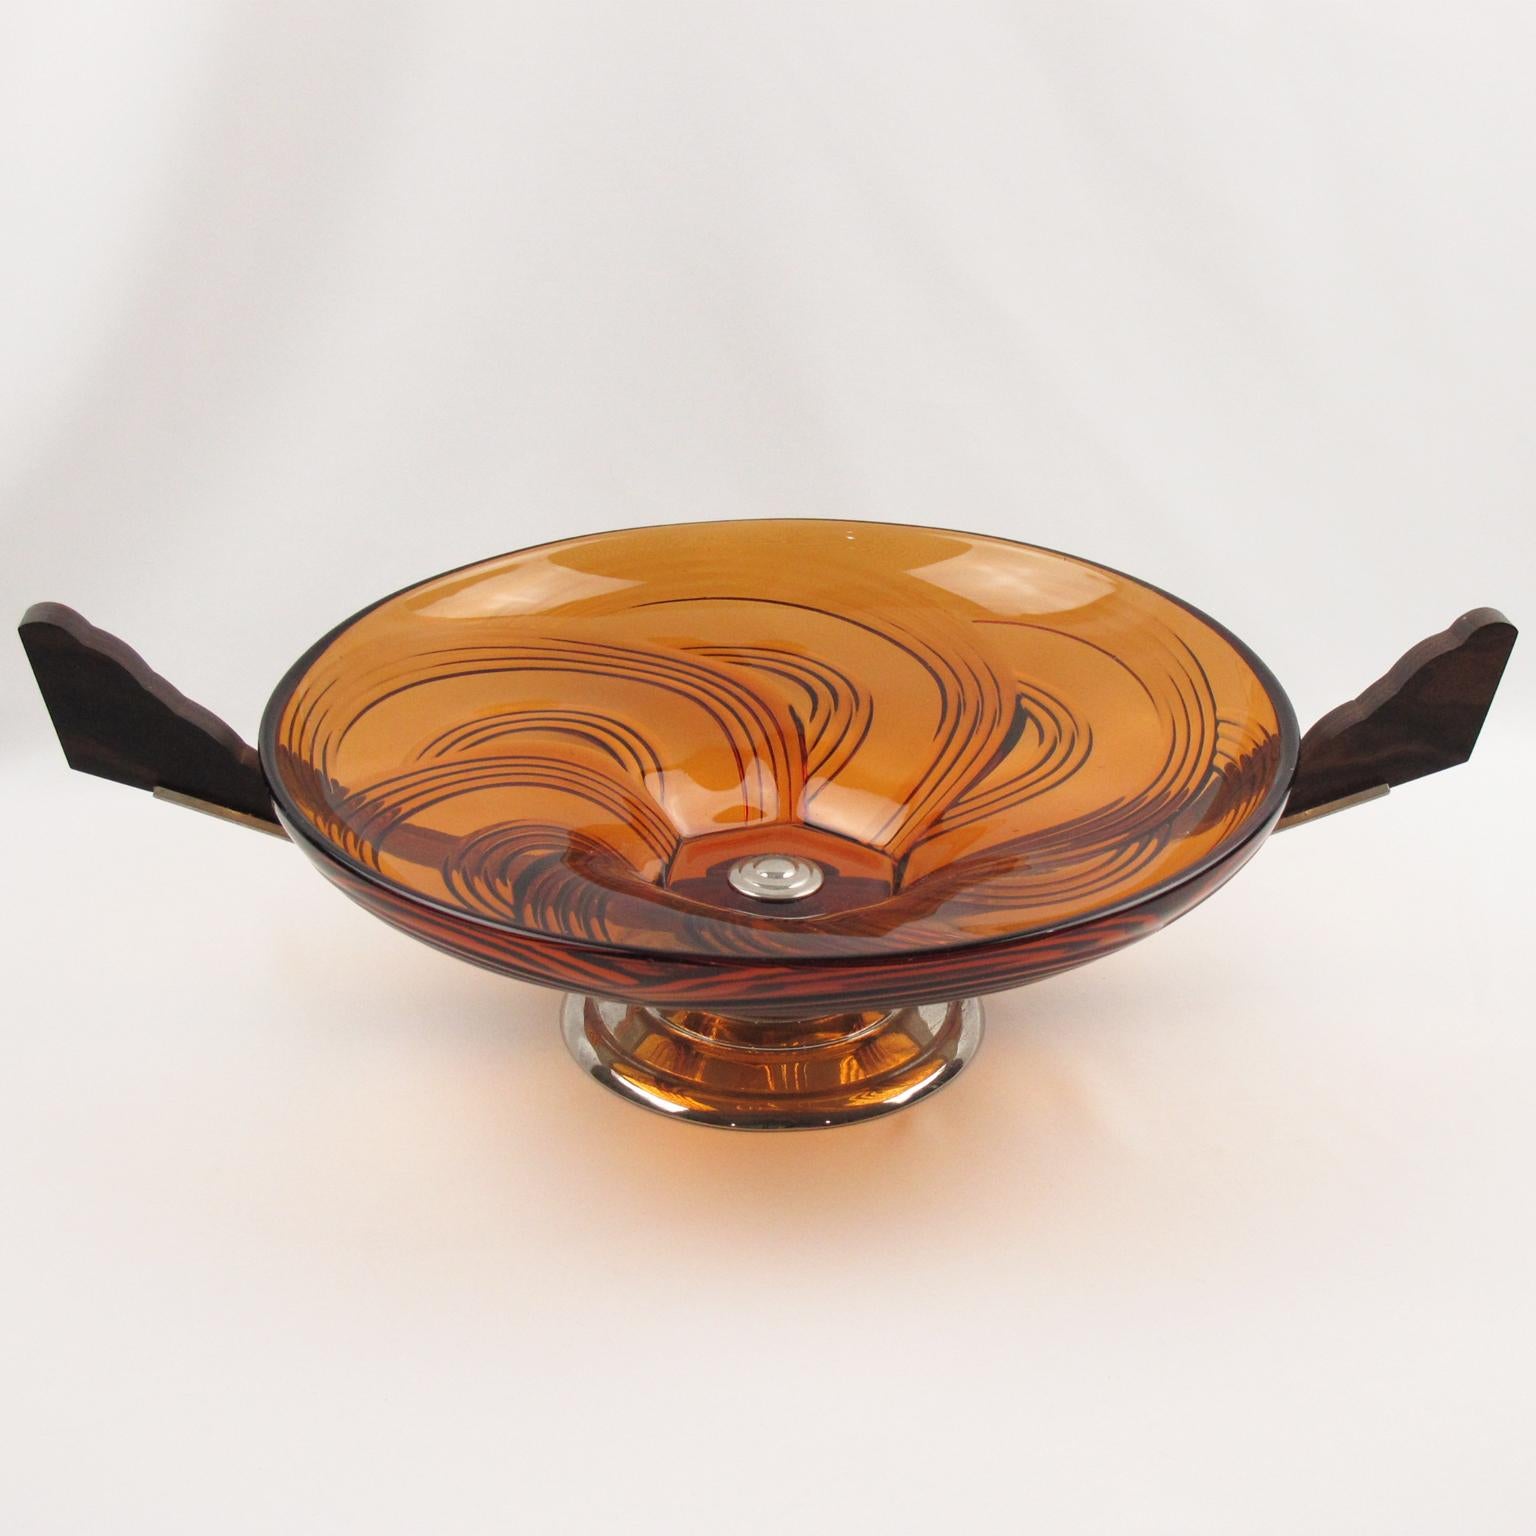 French Art Deco Macassar Wood and Glass Centerpiece Bowl, 1930s For Sale